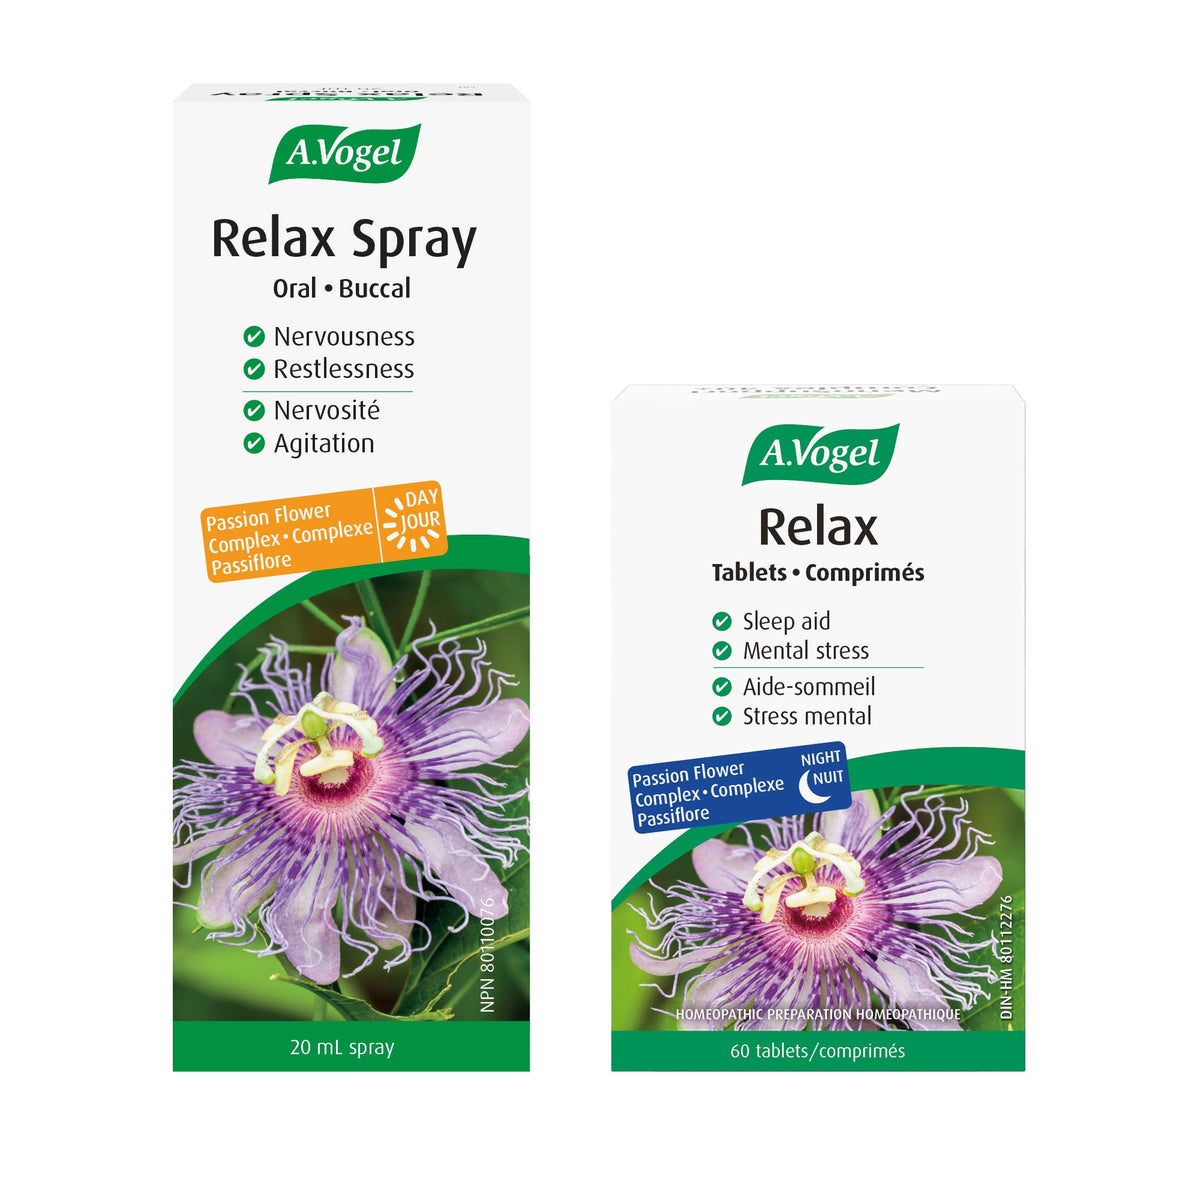 A.Vogel Relax Bundle - Fast Acting Stress Relief and Sleep Aid Day and Night - A.Vogel Canada